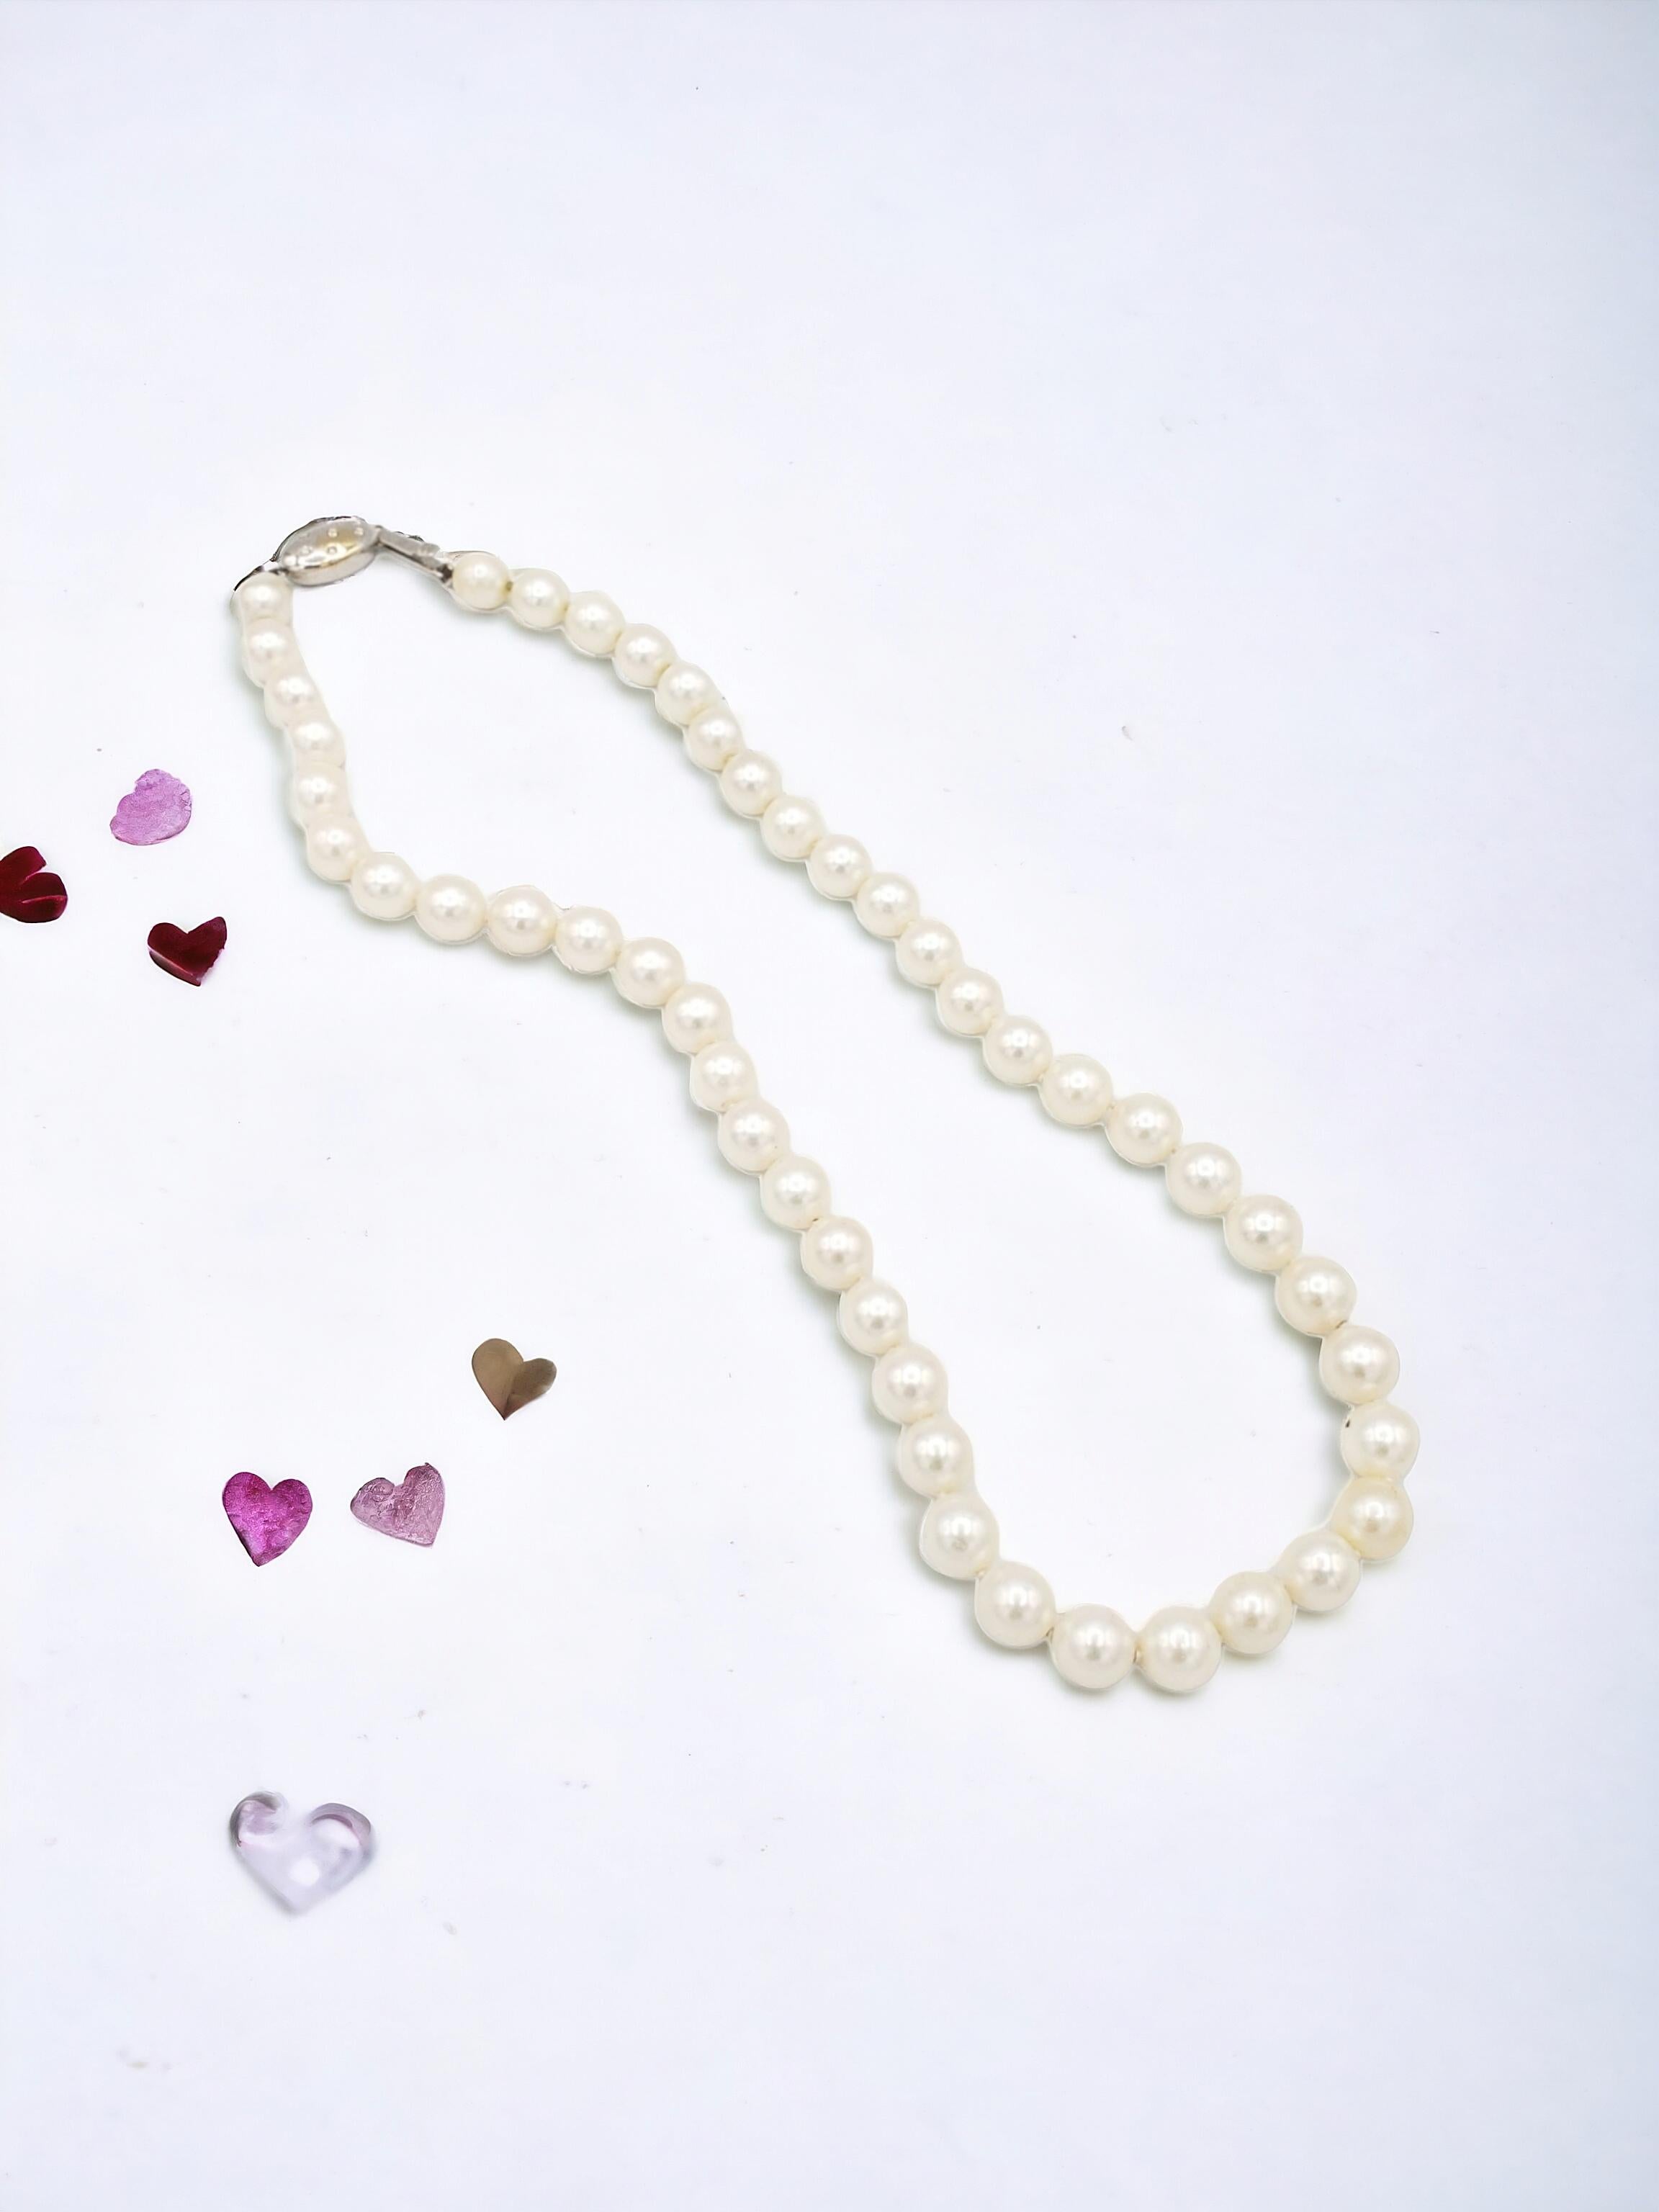 NEW AAA+ Quality Japanese Akoya Salt Water White Pearl Necklace For Sale 13